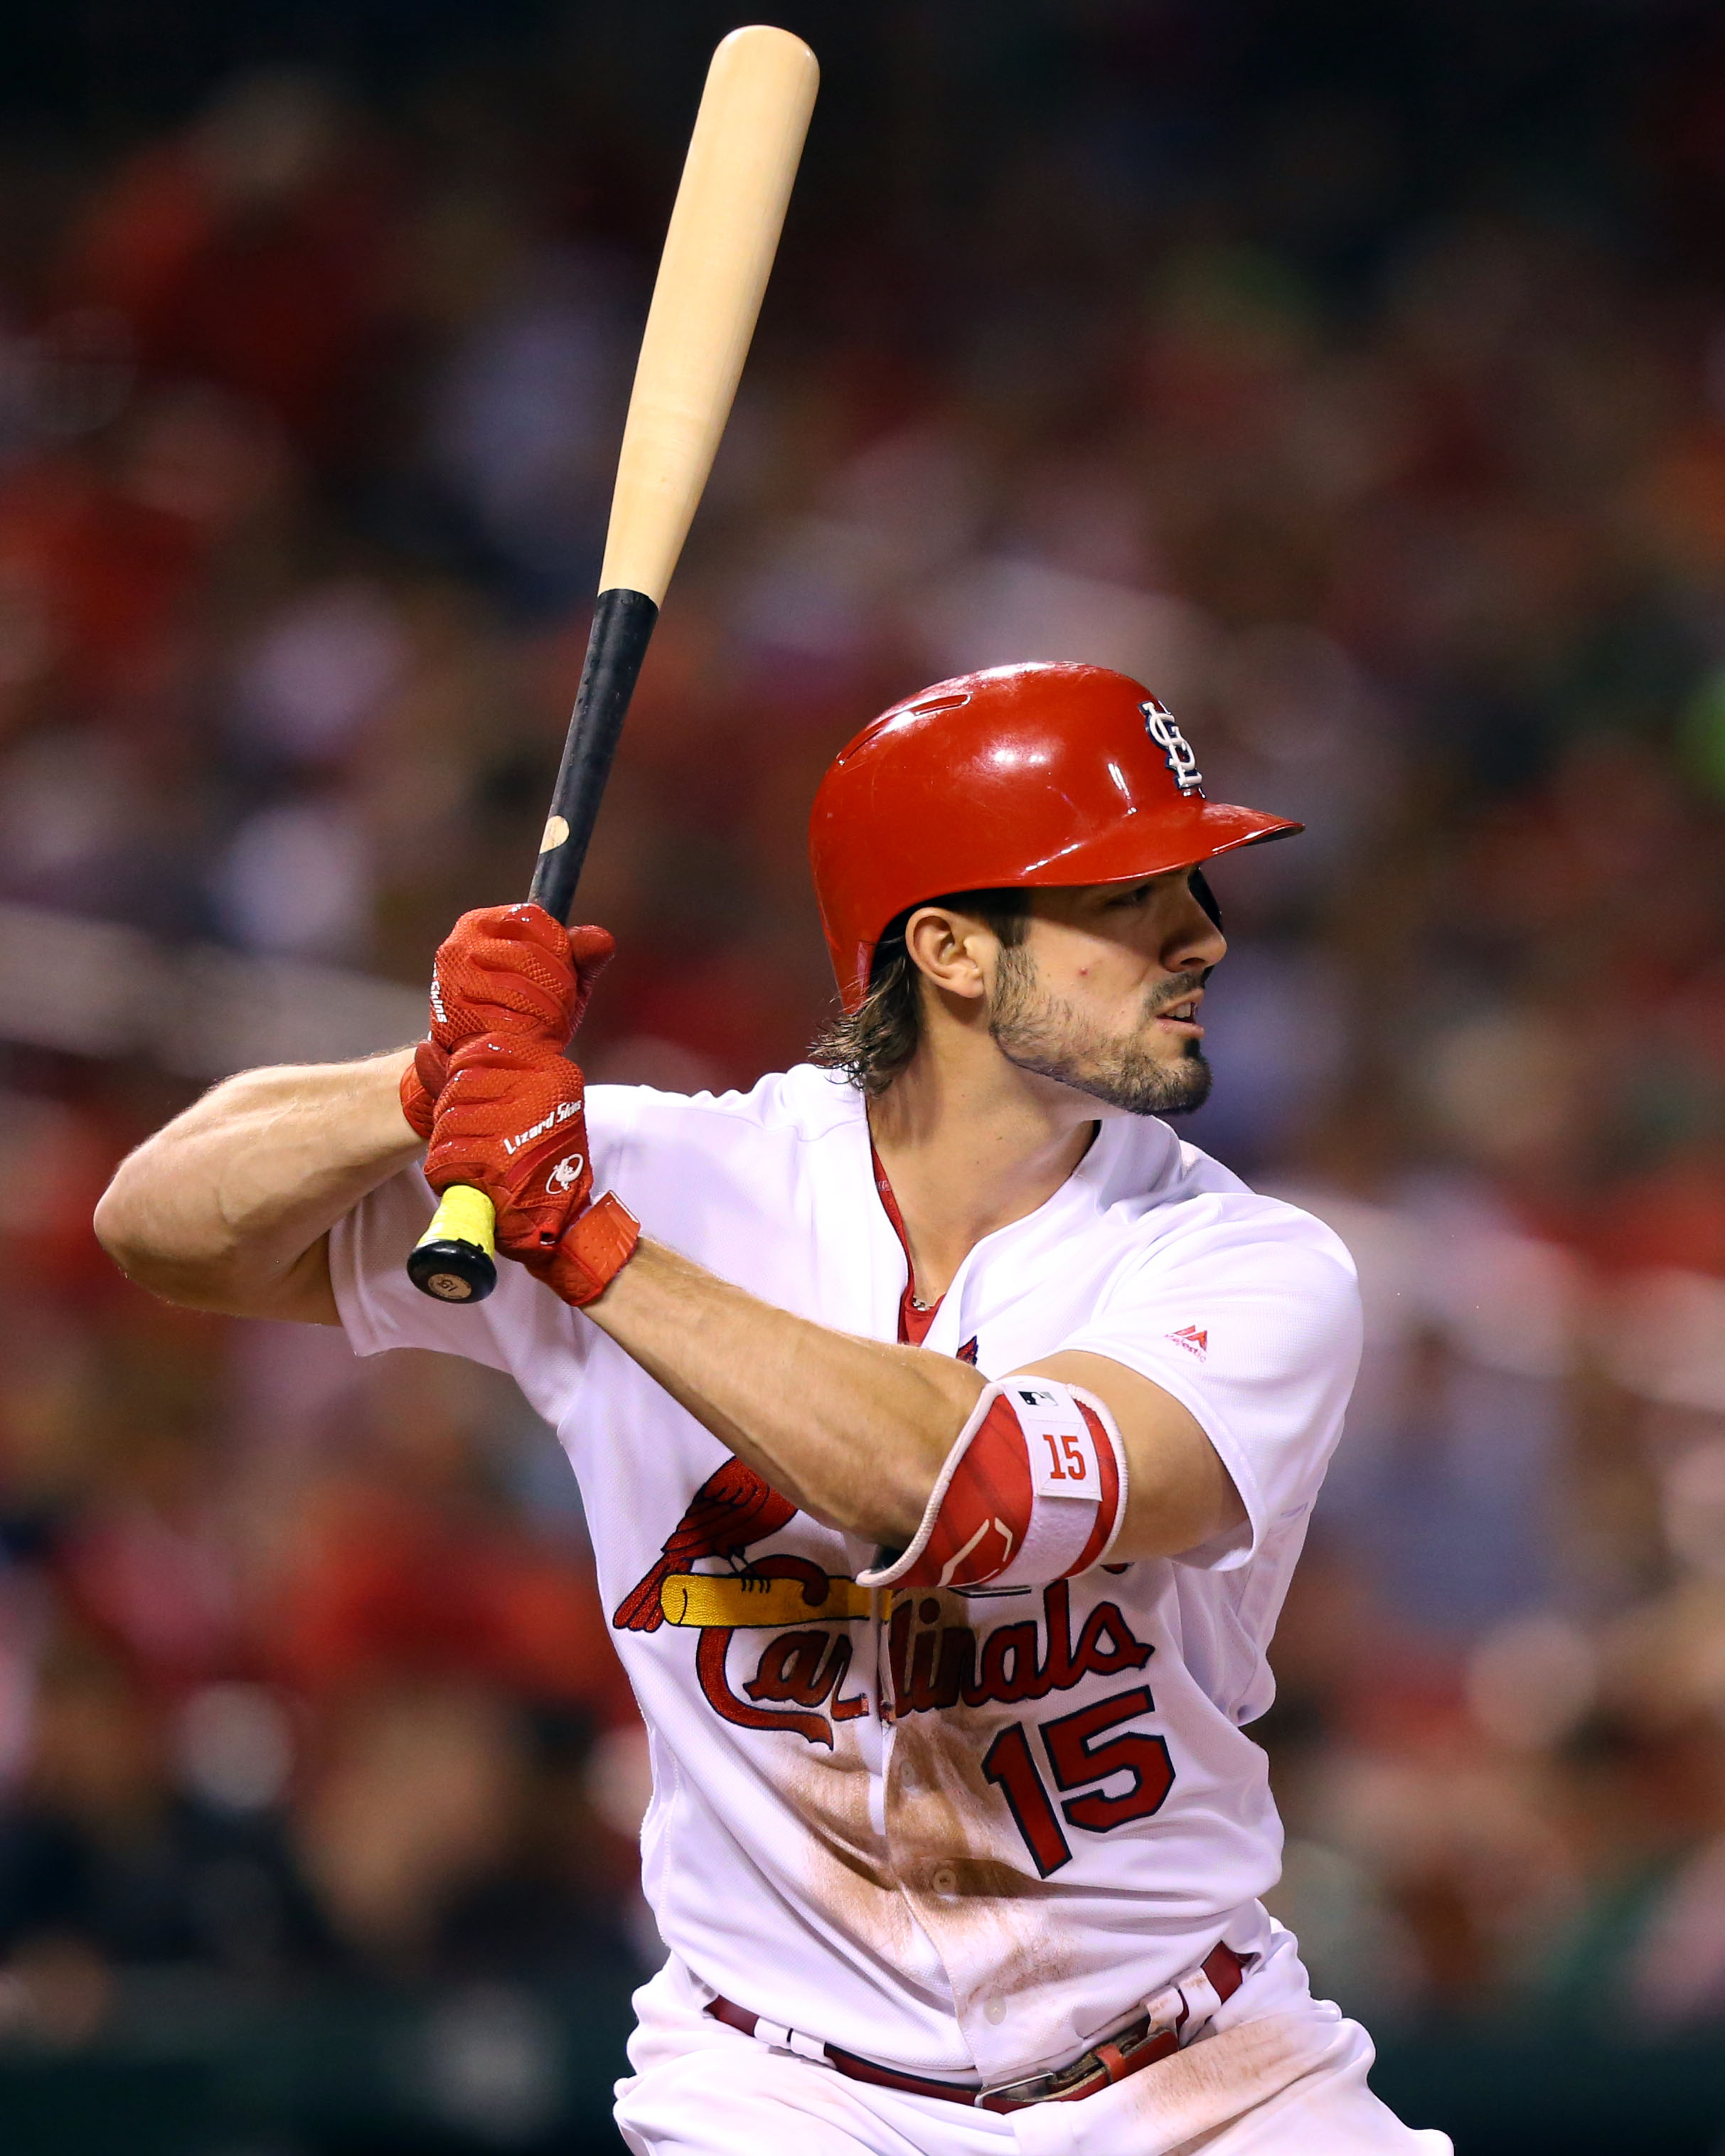 Blue Jays Acquire Randal Grichuk From Cardinals For Dominic Leone, Conner Greene - MLB Trade Rumors